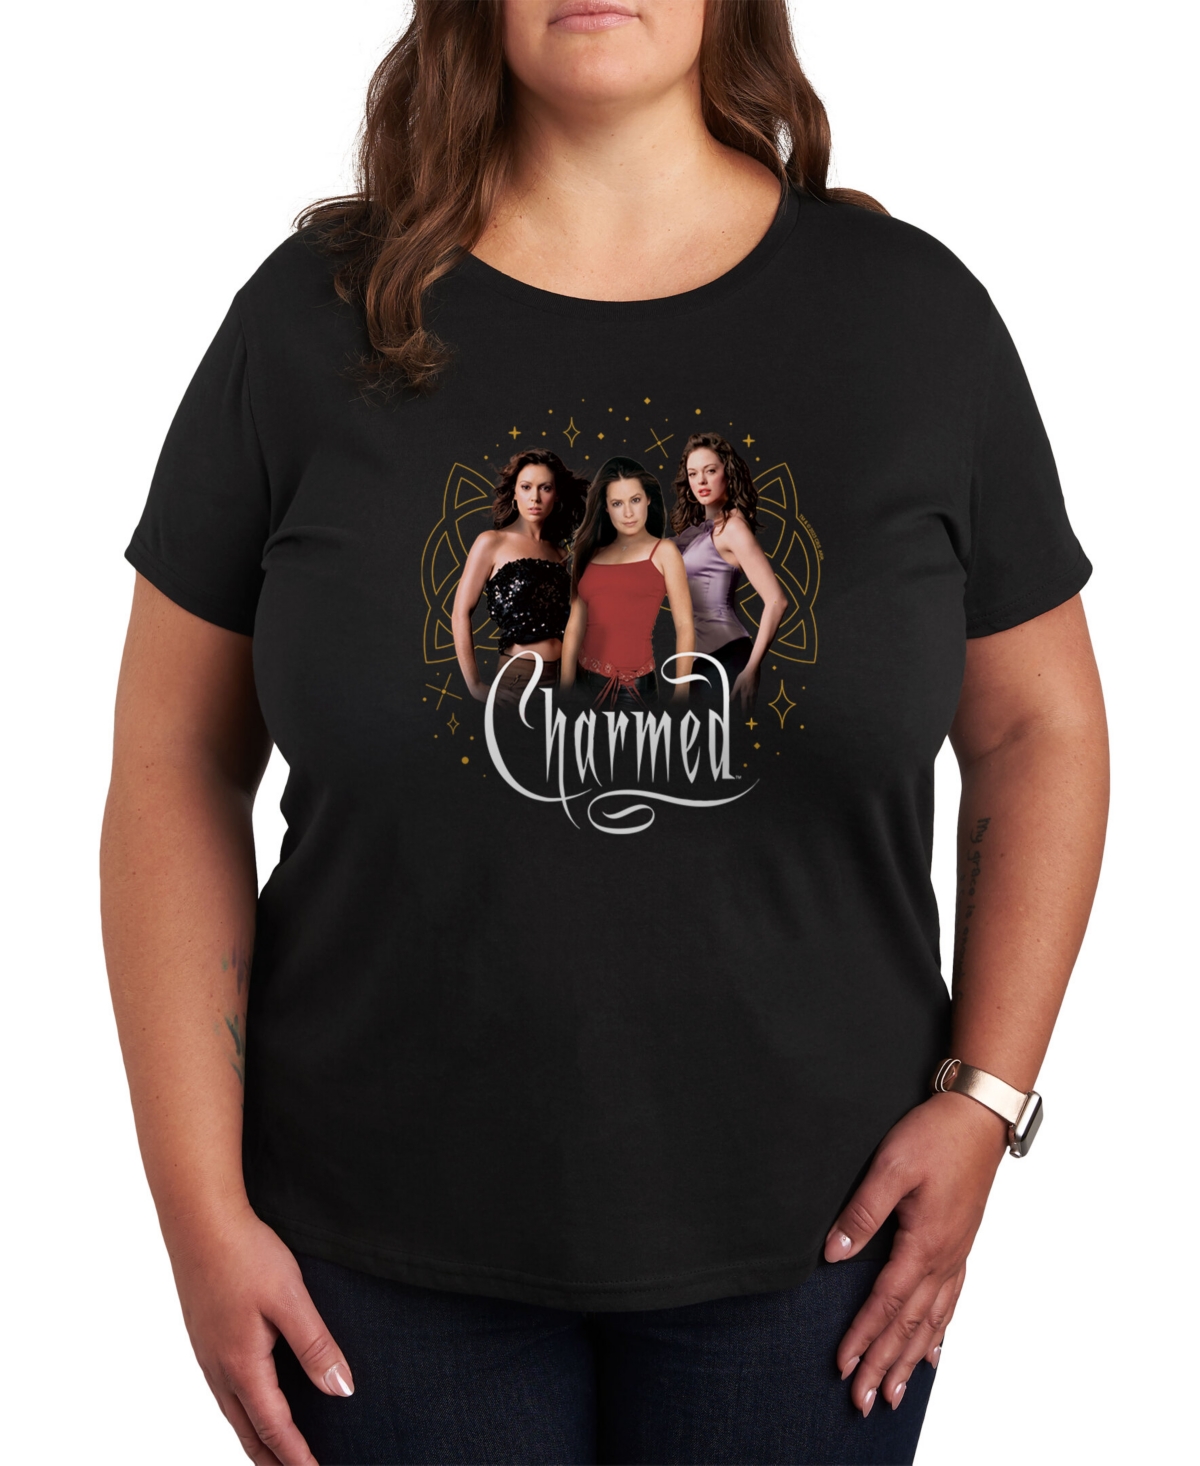 Air Waves Trendy Plus Size Charmed Graphic T-shirt - Black